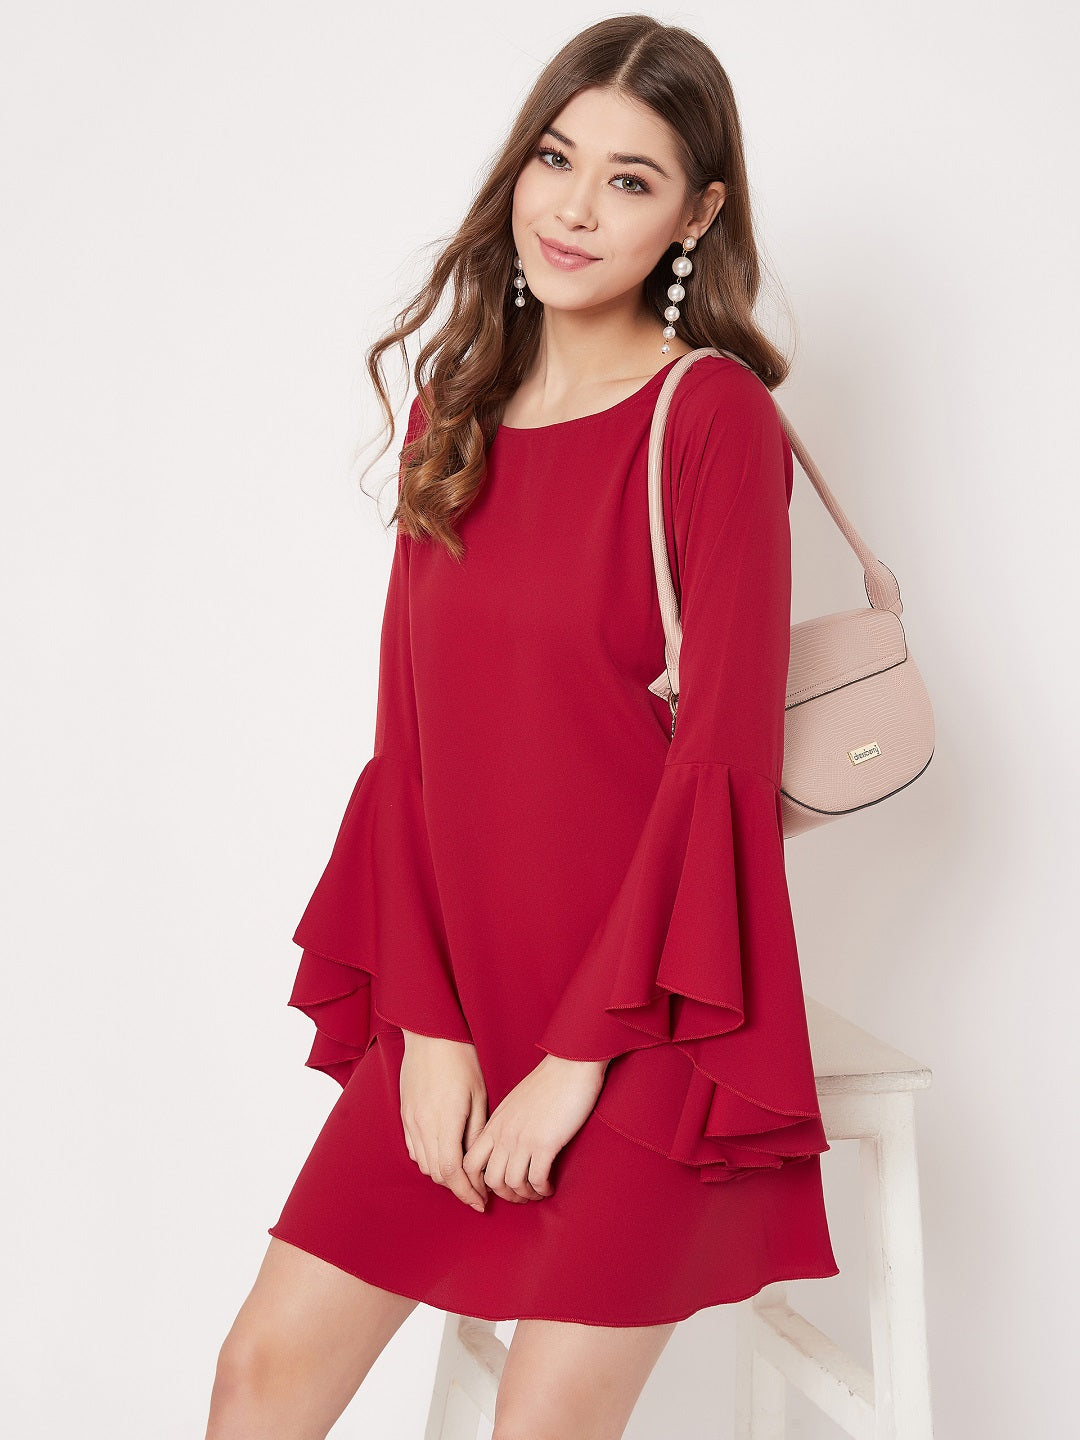 Berrylush Women Solid Red Flared Sleeves A-Line Mini Dress